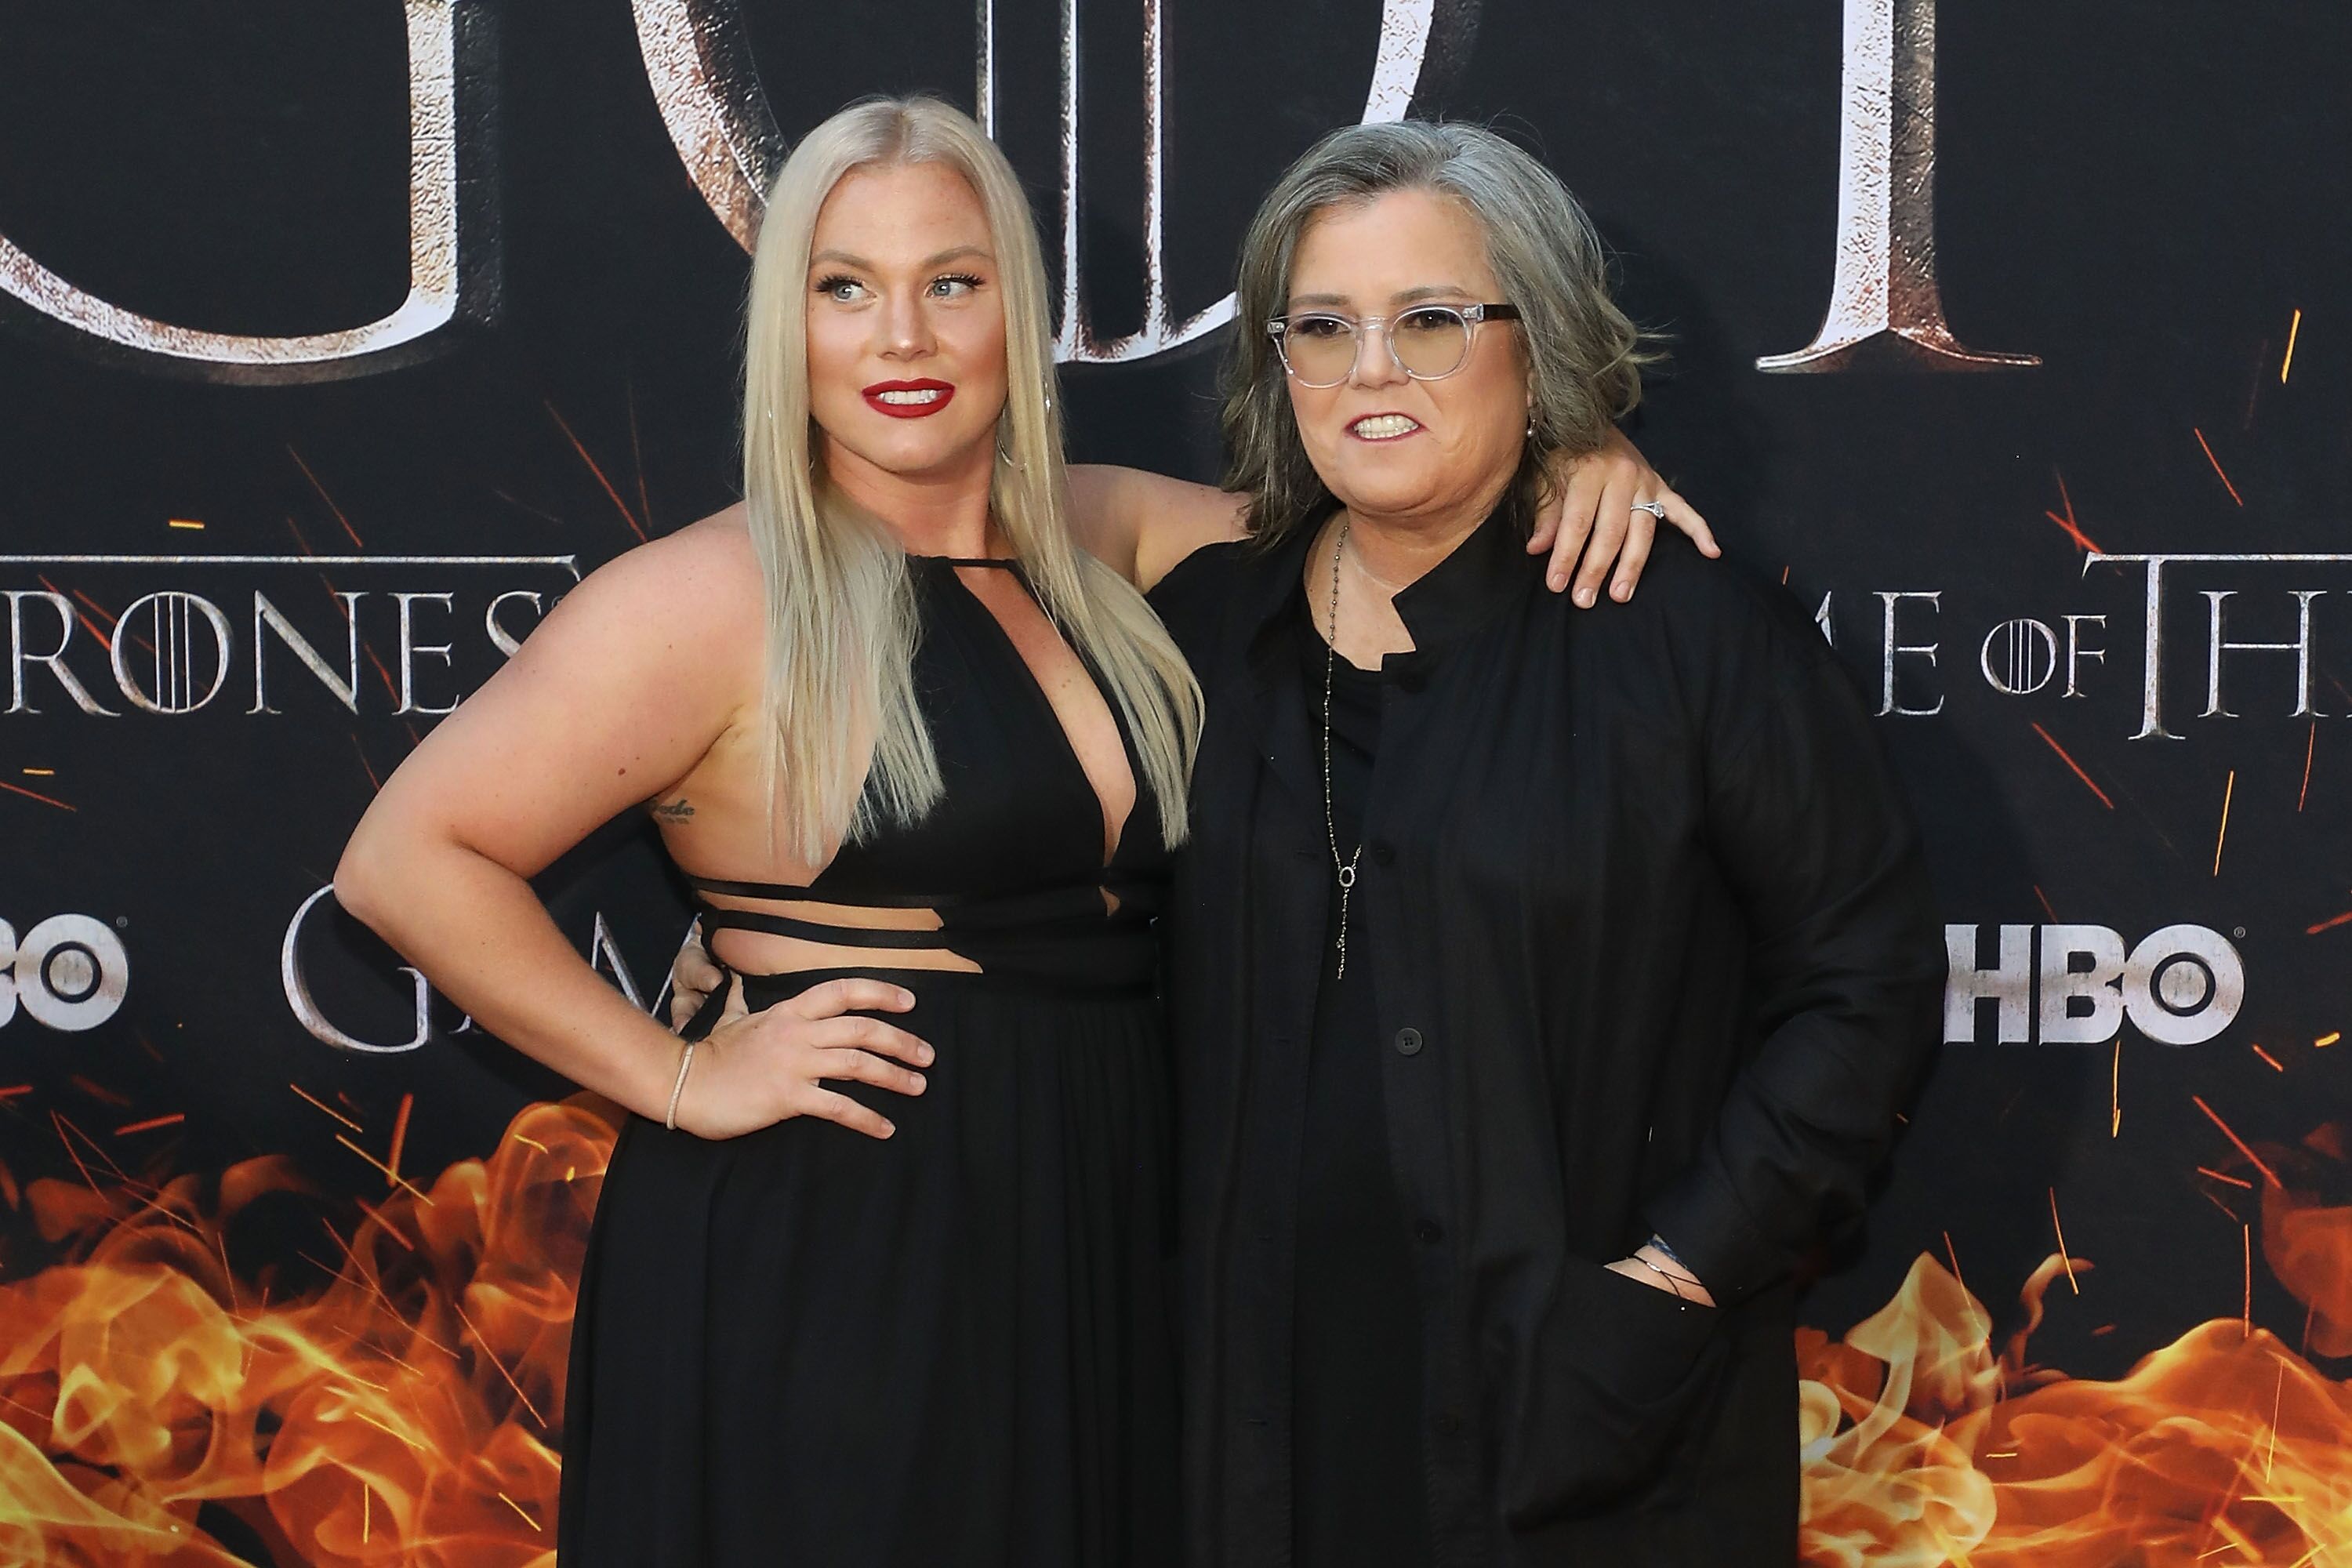 Elizabeth Rooney and Rosie O'Donnell the Season 8 premiere of "Game of Thrones." | Source: Getty Images